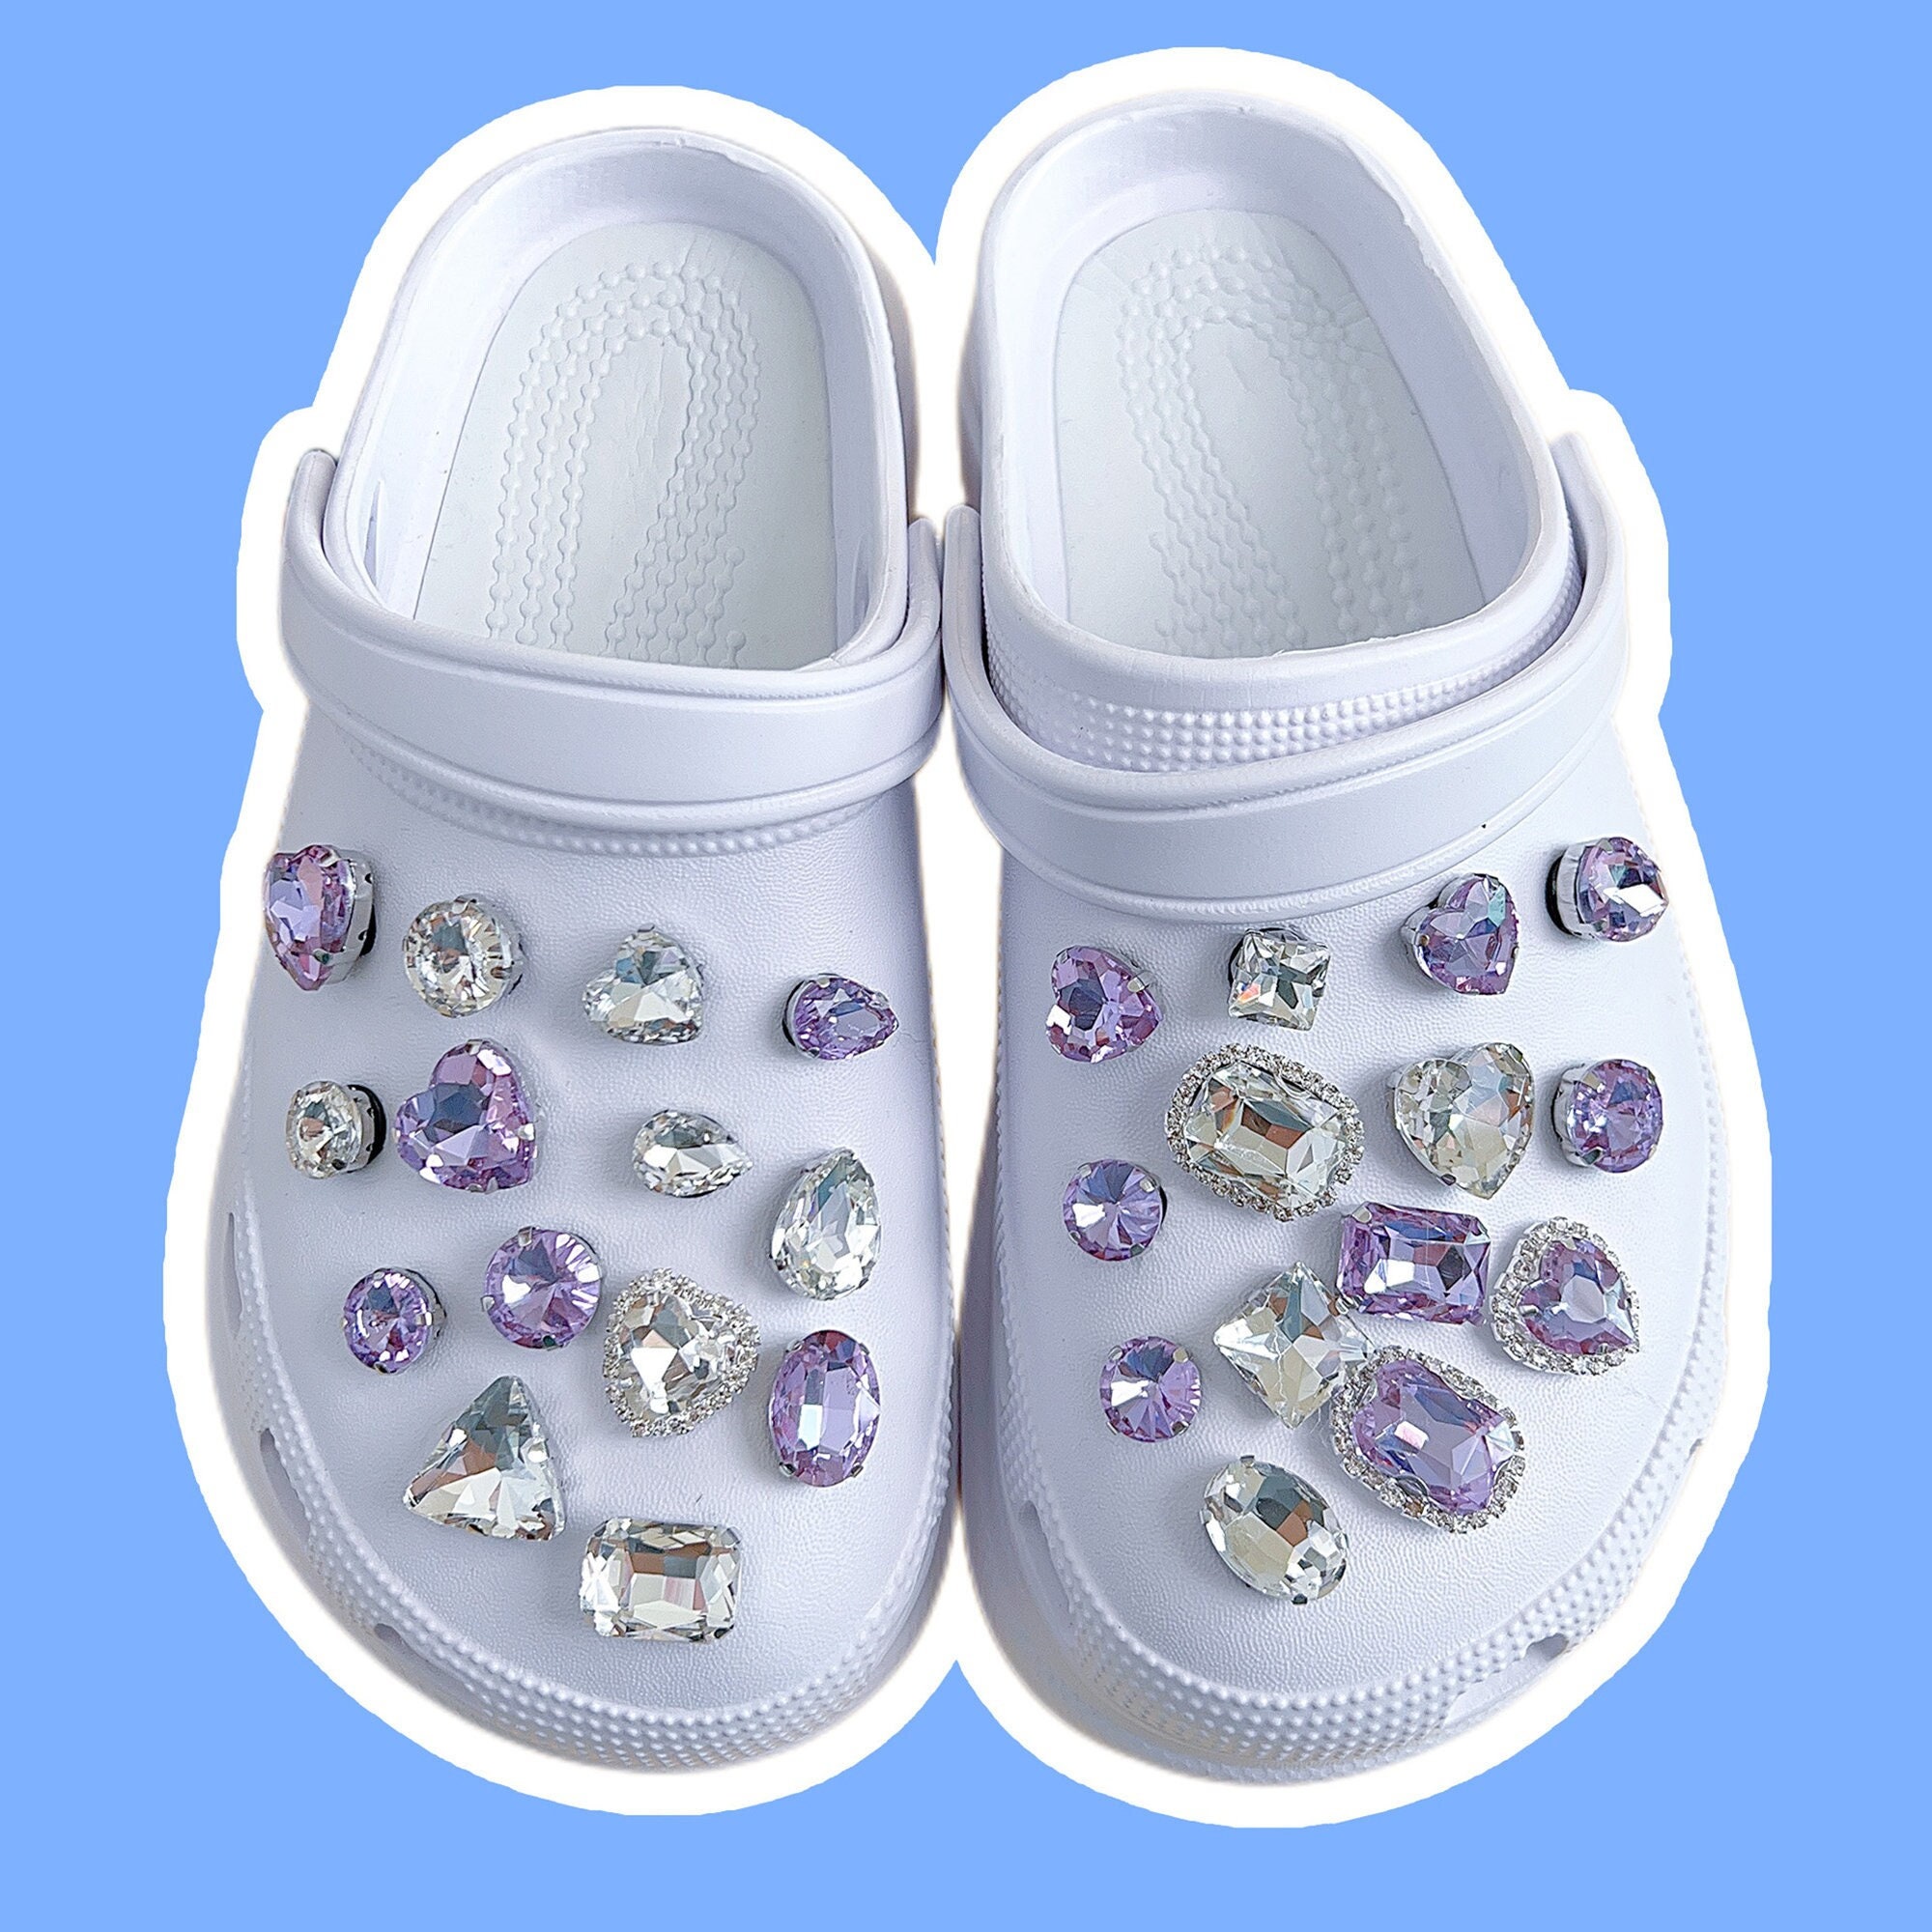 Trendy Shoes Charms Accessories Bling Rhinestone Girl Gift For Croc Shoe